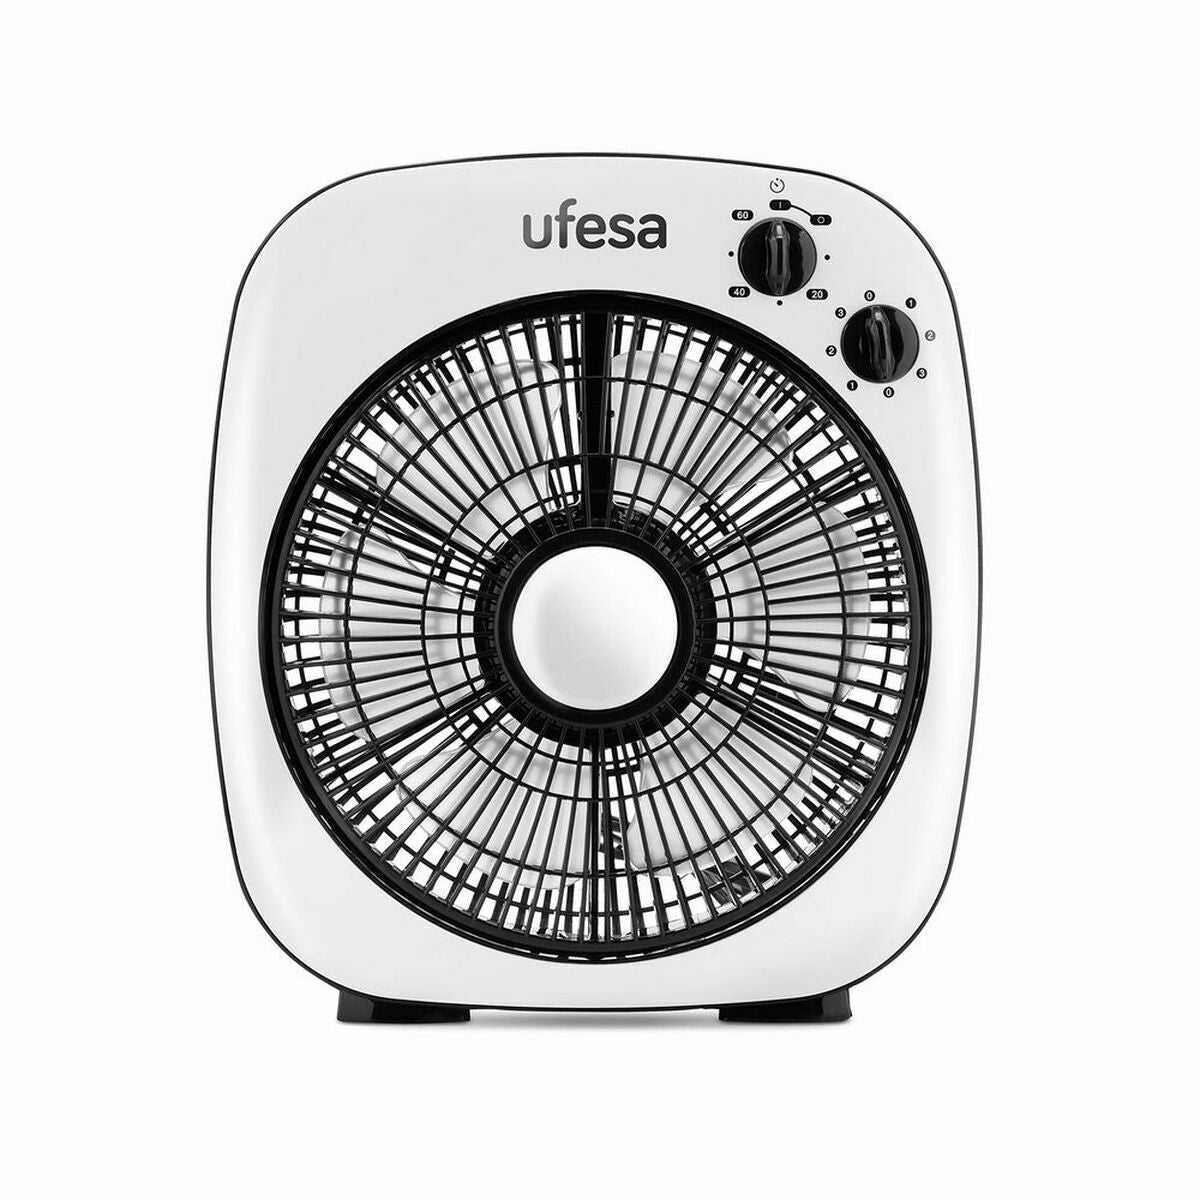 Table Fan UFESA BF5030 50W 50 W (25 cm), UFESA, Home and cooking, Portable air conditioning, table-fan-ufesa-bf5030-50w-50-w-25-cm, Brand_UFESA, category-reference-2399, category-reference-2450, category-reference-2451, category-reference-t-19656, category-reference-t-21087, category-reference-t-25217, Condition_NEW, ferretería, Price_20 - 50, summer, RiotNook